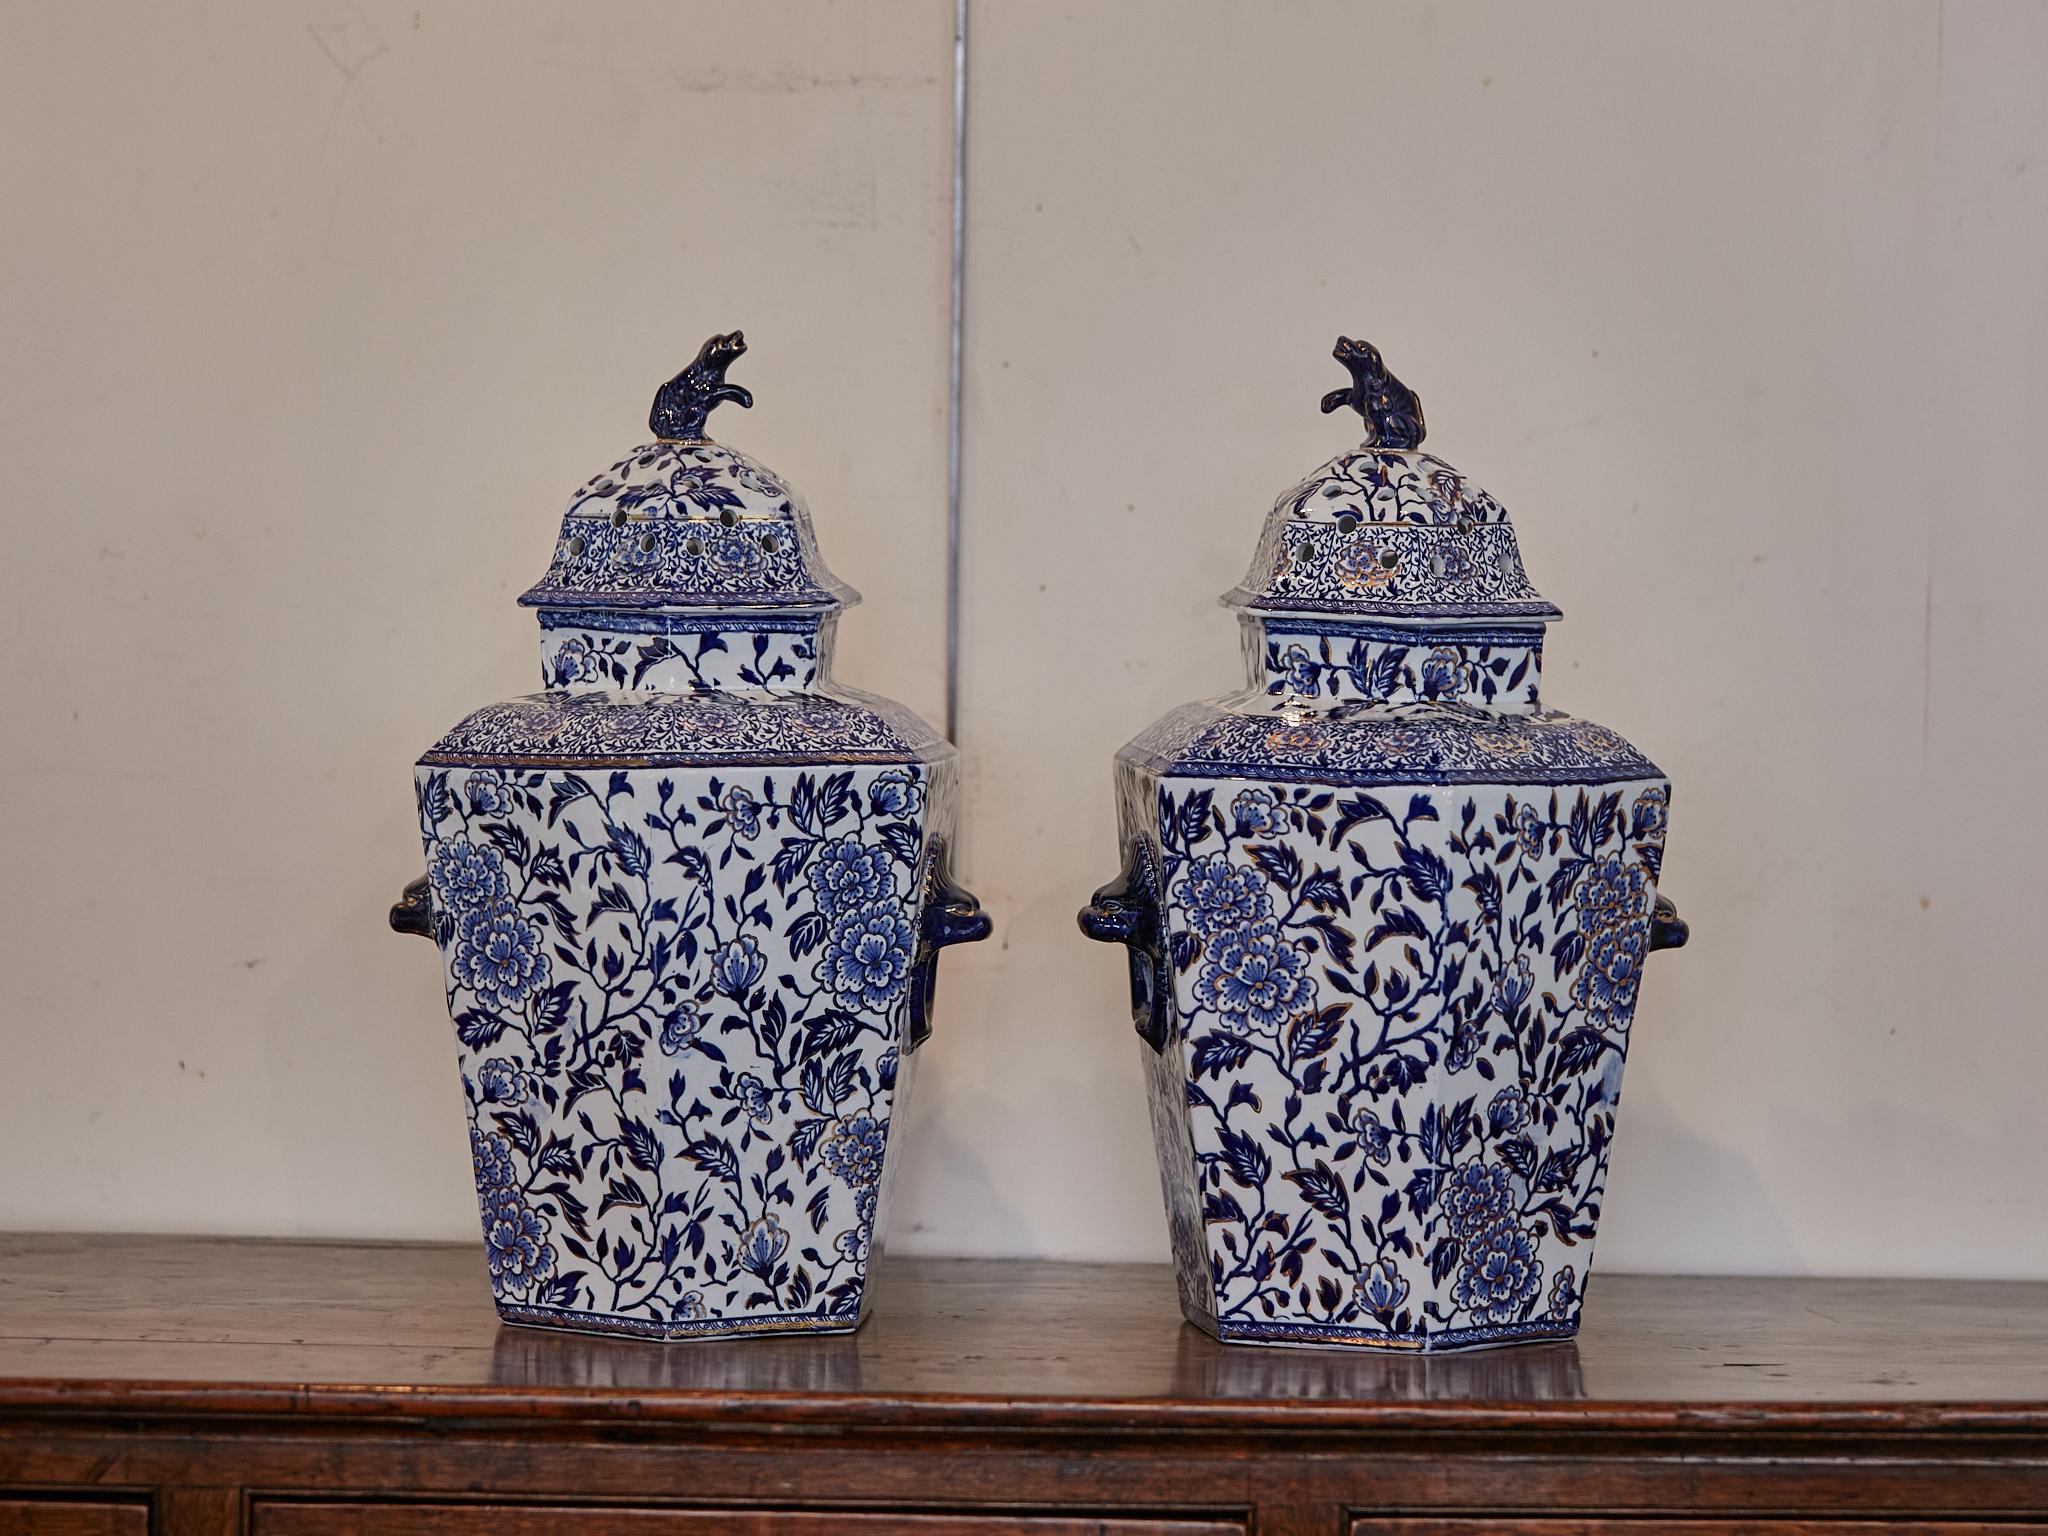 A pair of English blue and white porcelain lidded hexagonal pot pourri pots from the 19th century with dog finials. Embrace the elegance of Chinoiserie with this exquisite pair of English blue and white porcelain lidded hexagonal pot pourri pots